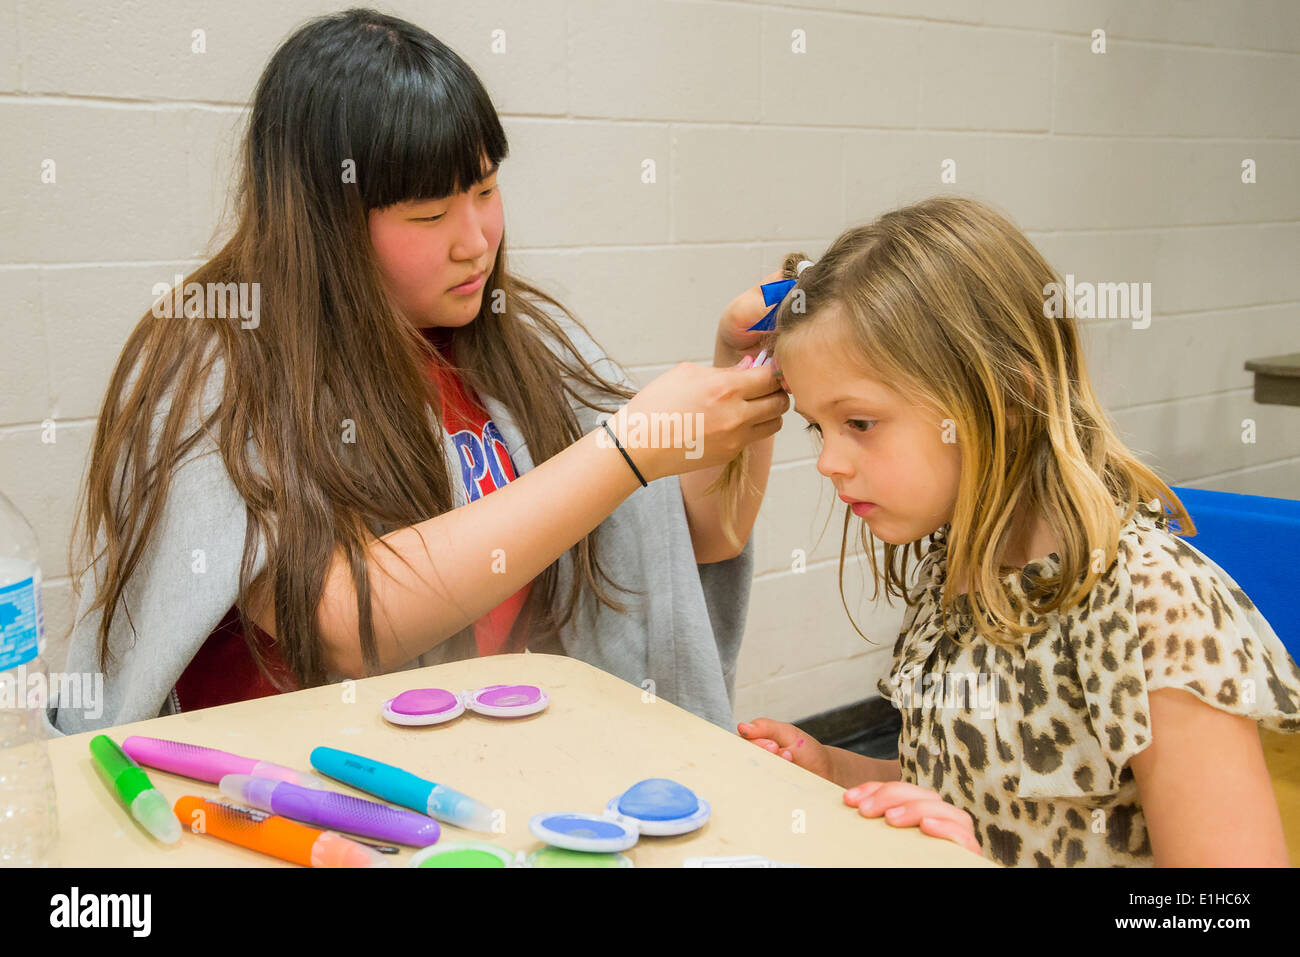 Young girl gets temporary hair chalk applied at Spring Fair Stock Photo